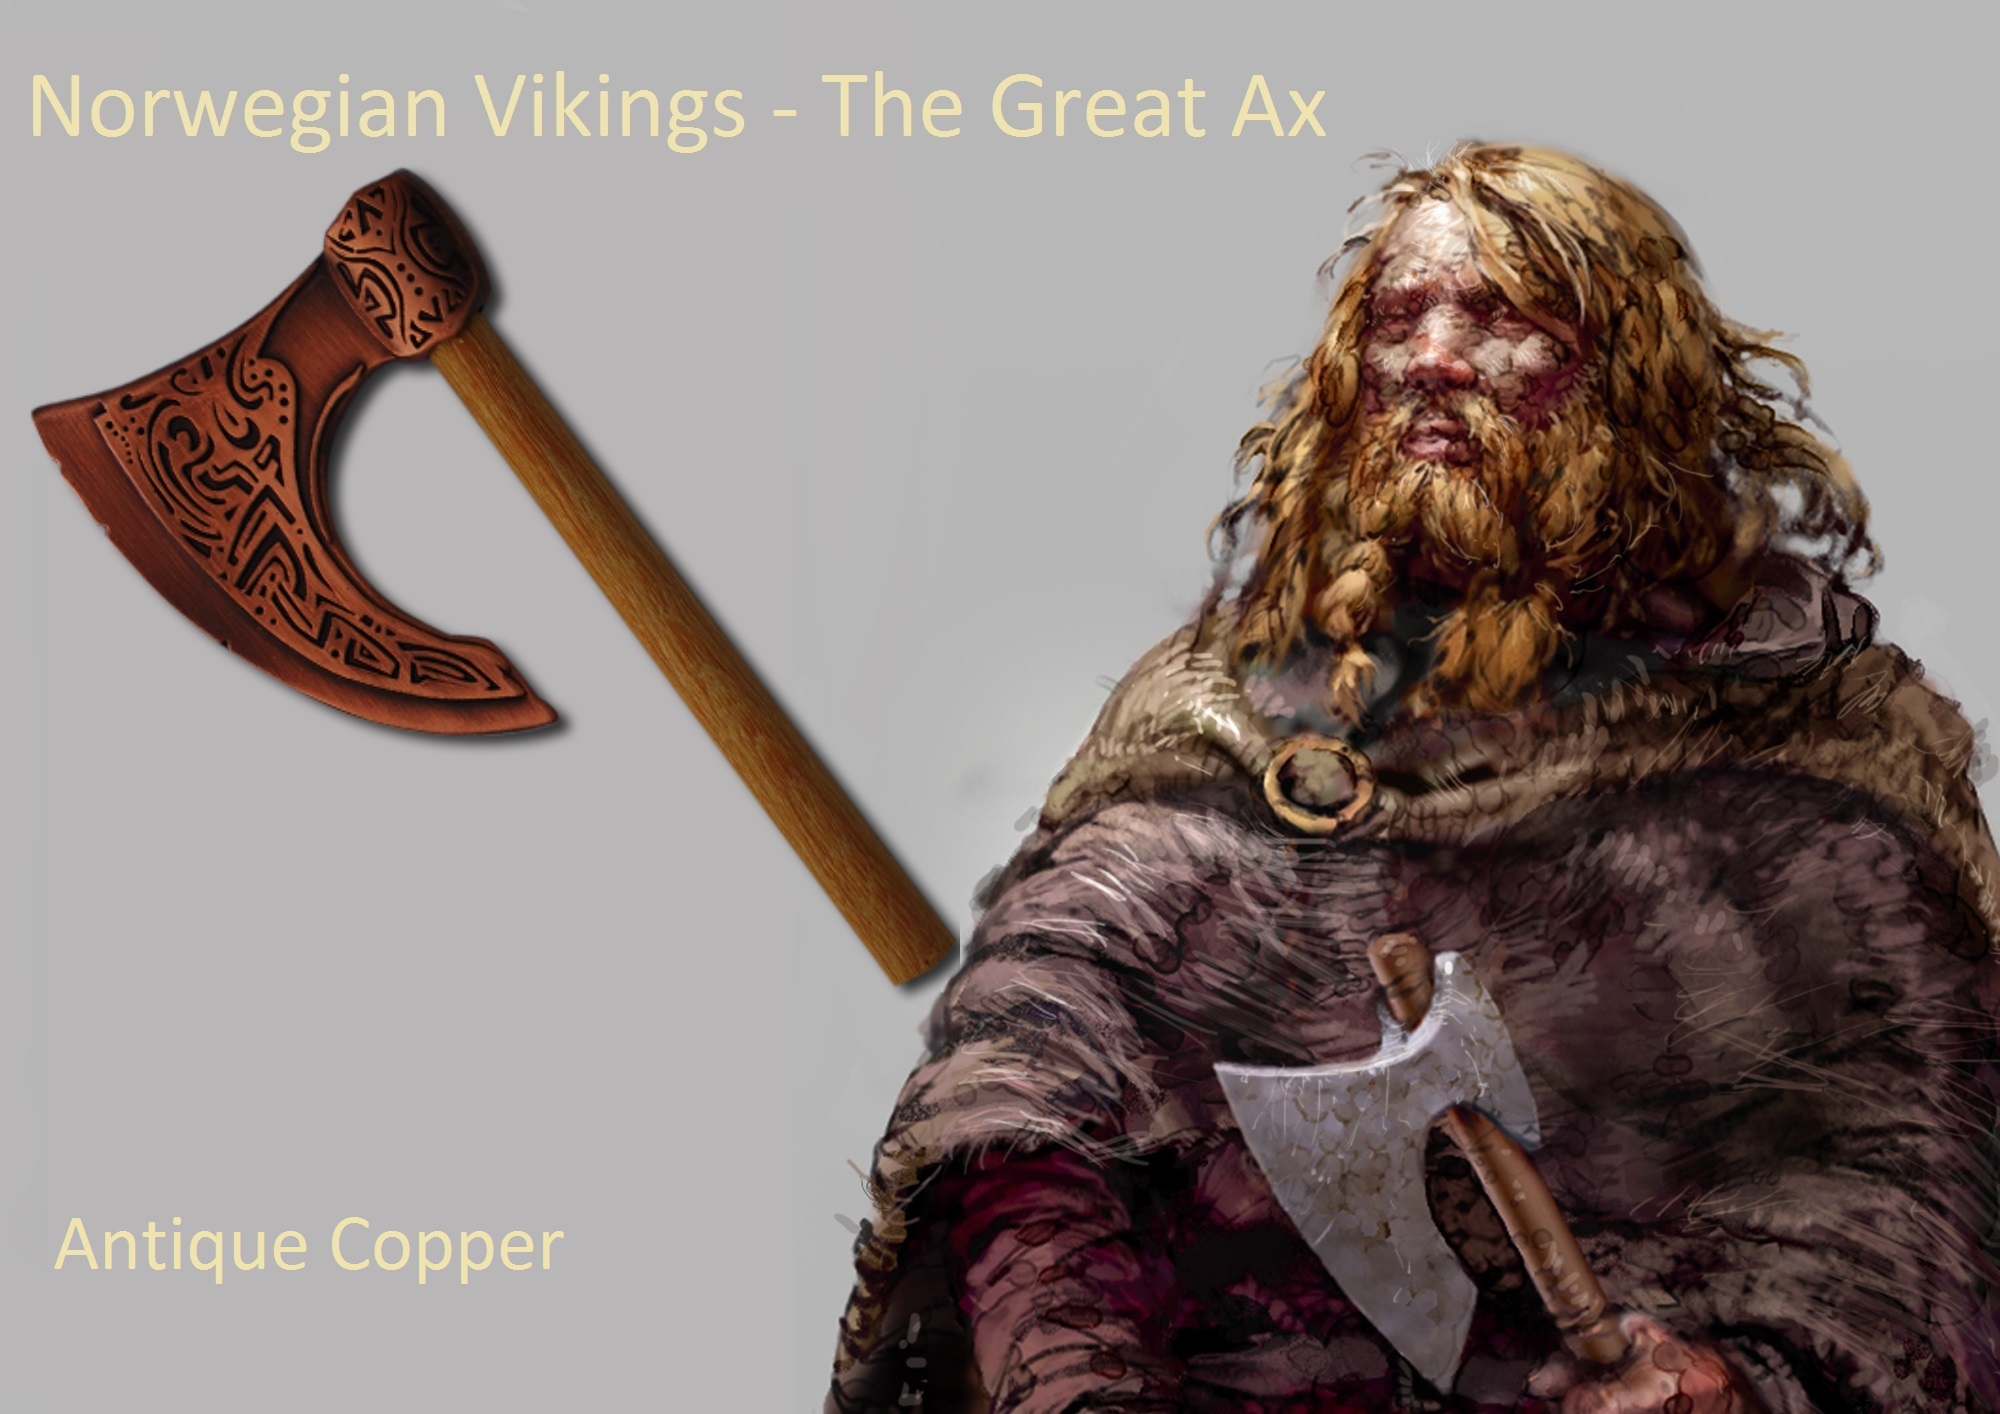 The Great Ax - Antique Copper.jpg